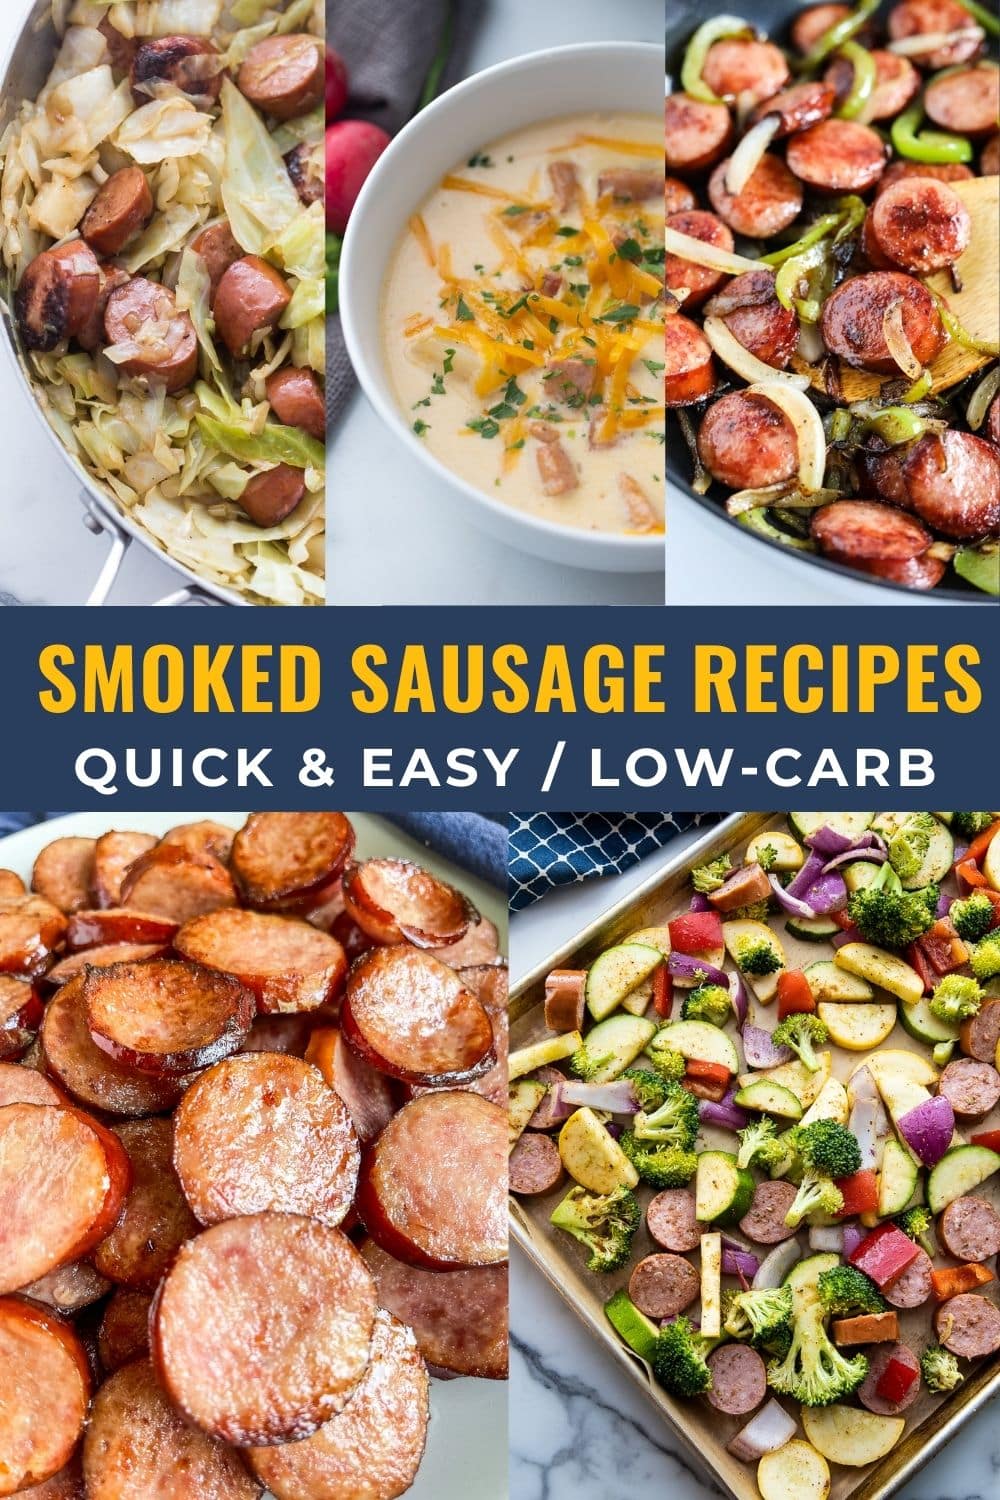 Collage of 5 color photographs of delicious keto recipes featuring smoked sausage, including a close up of sausage and cabbage skillet, overhead view of sheet pan sausage and vegetables, bowl of cheesy sausage soup, sausage sauteed with peppers and onions, and platter with sausage, cheese and pickles. Overlaid Text Across Image: 30-Minute Easy Keto Smoked Sausage Skillet Recipes